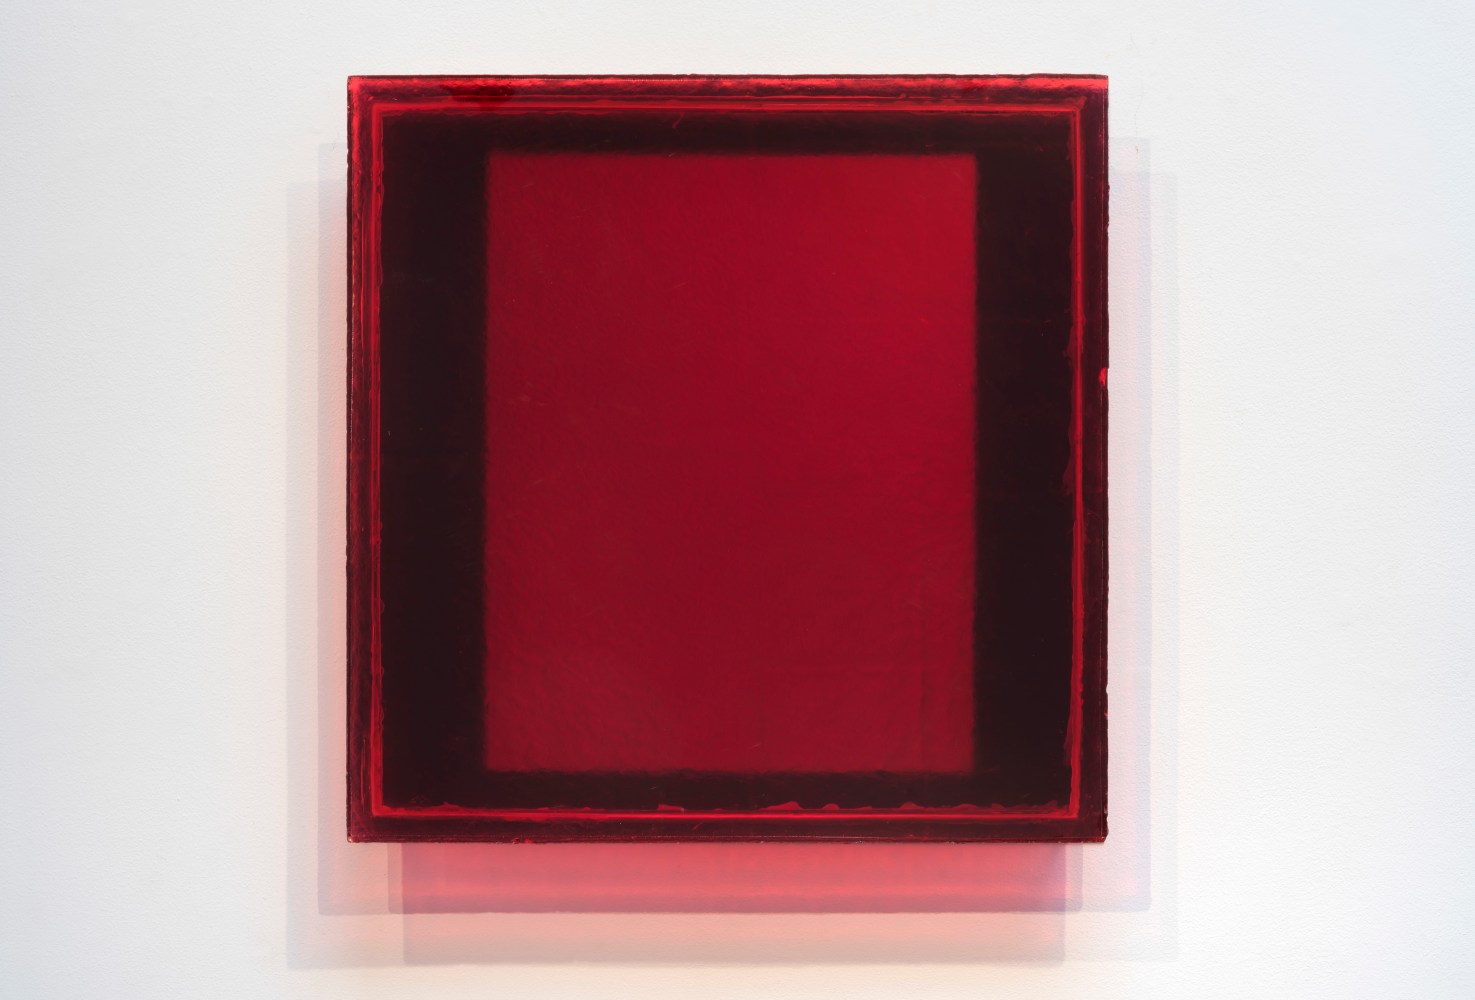 Ron Cooper (b. 1943), Red Mirror Square, 1982, transparent polyester resin, plexiglass, pigment and mirror, 24 x 24 x 3 5/8 inches;  61 x 61 x 9.2 centimeters LSFA# 14885